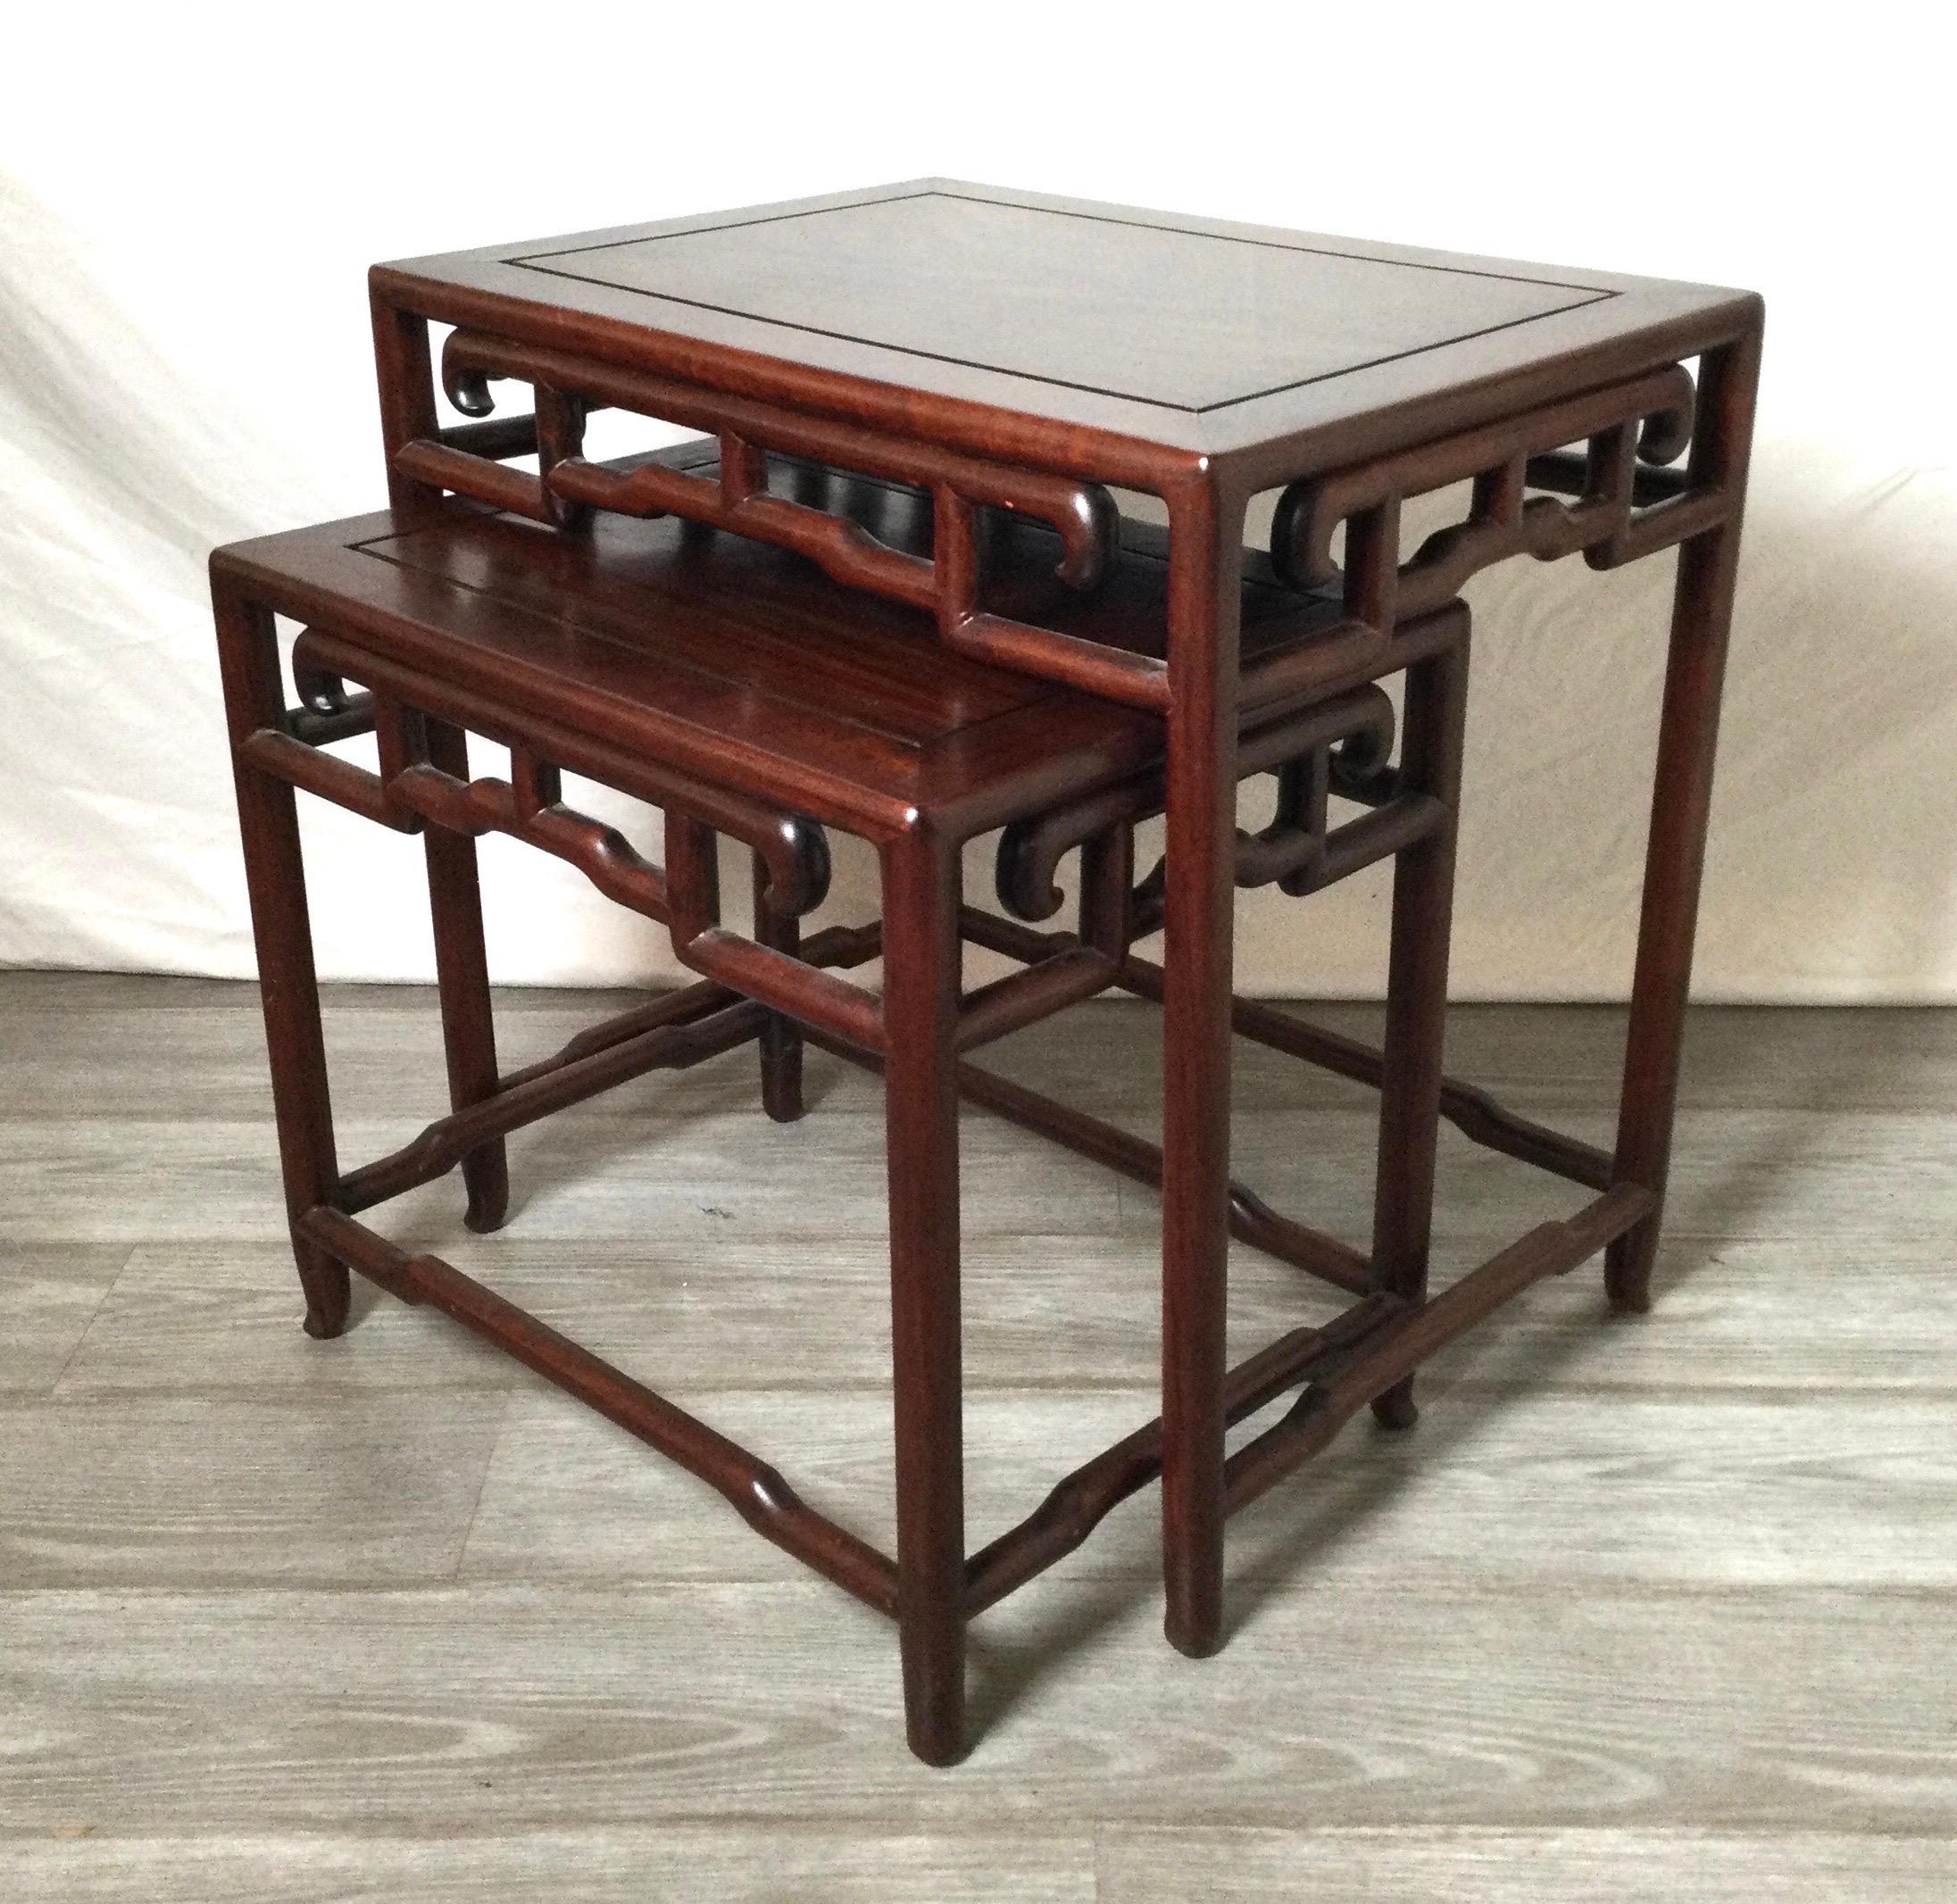 A set of 2 antique Chinese hongmu hand carved nesting tables. The smaller that fits neatly into the larger table for easy access. 22 wide, 22.25 high, 16 deep.